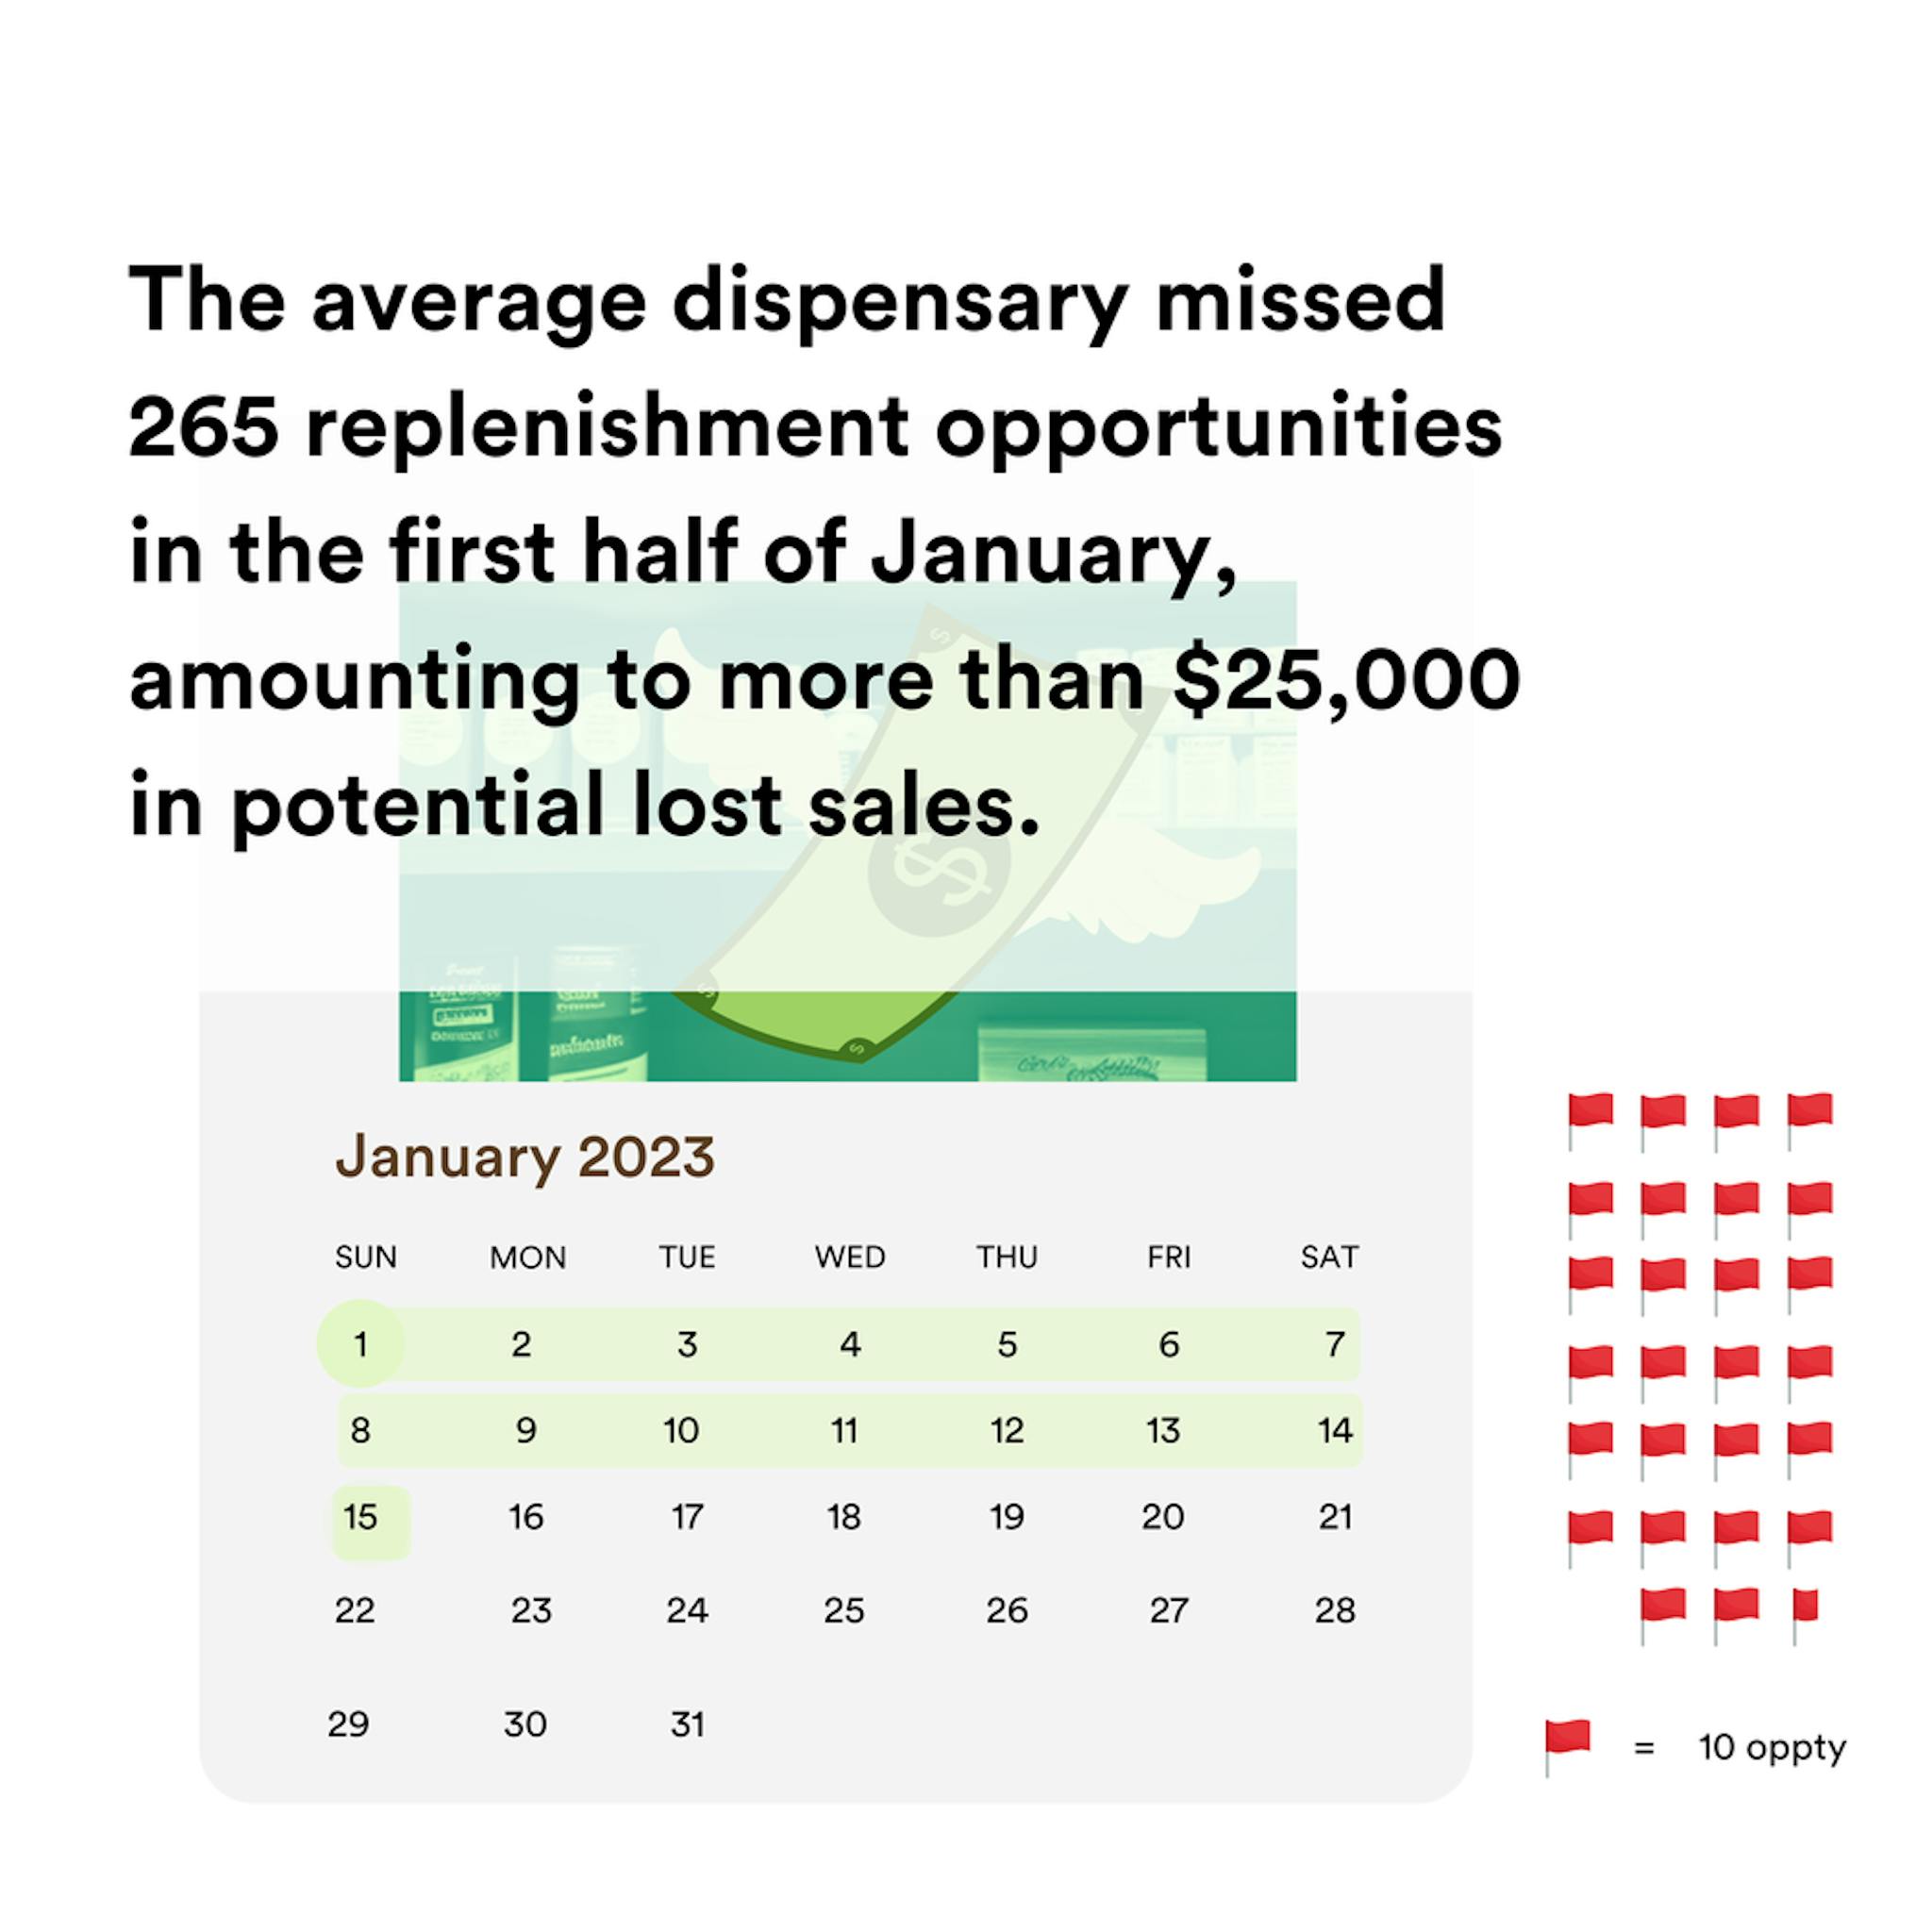 A calendar of January 2023 is illustrated with the first two weeks highlighted. Text above says "The average dispensary missed 265 replenishment opportunities in the first half of January, amounting to more than $25,000 in potential lost sales." Red flags icons sit to the right of the graphic, showing the 265 lost opportunities in visual form